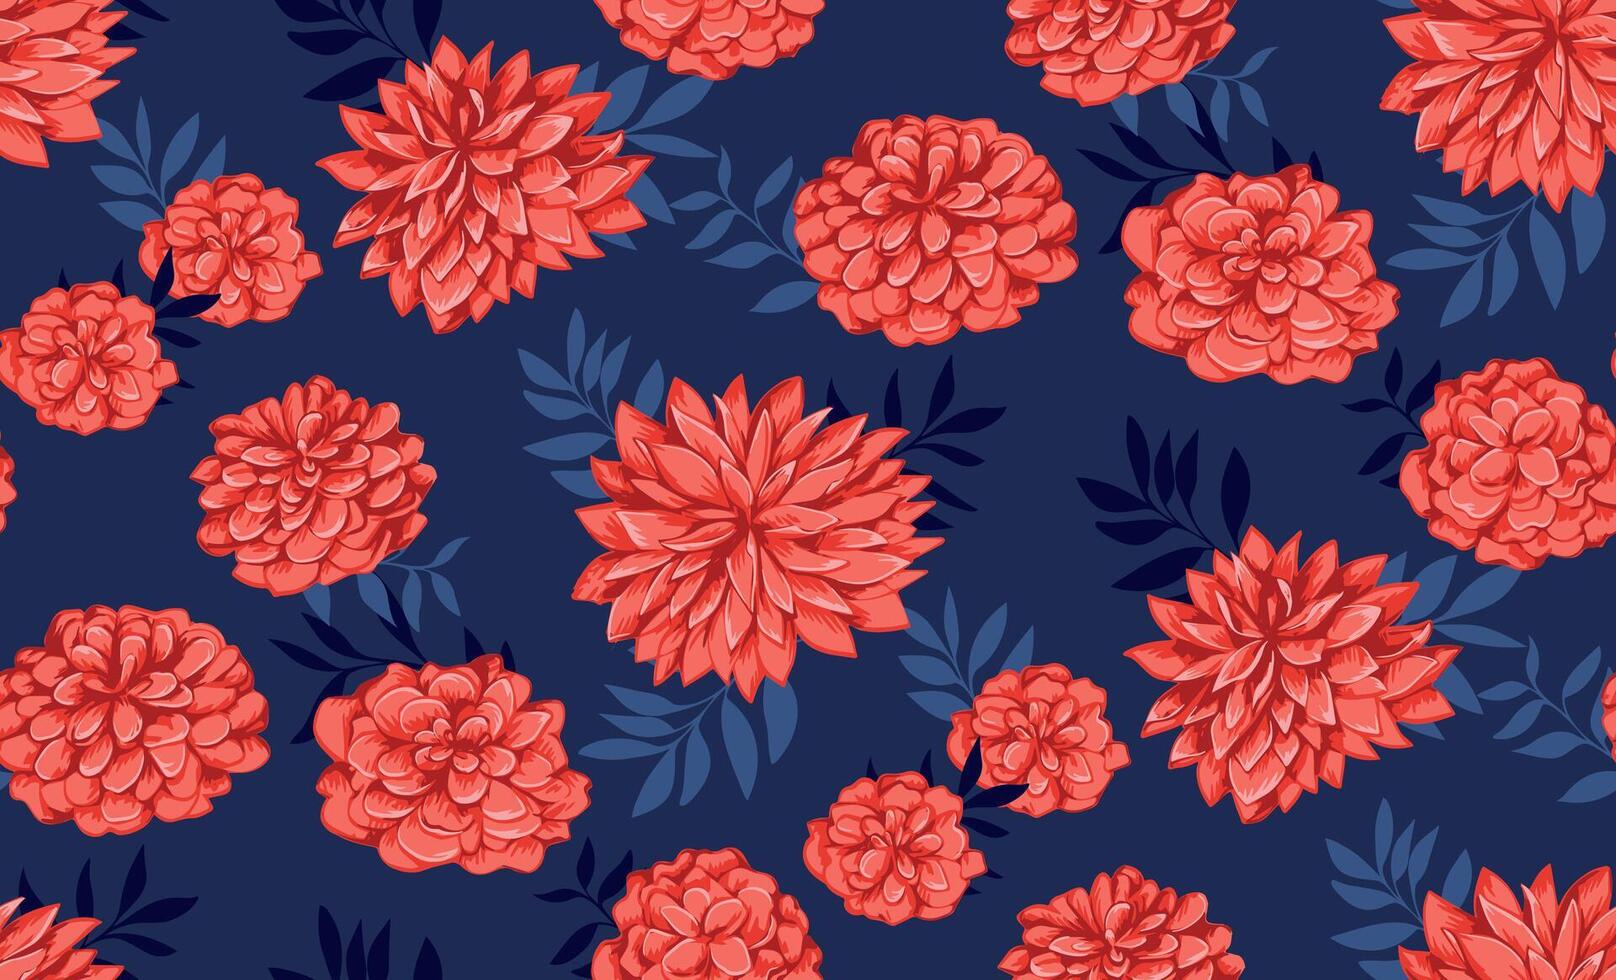 Colorful orange stylized flowers peonies with shape leaves on a blue background. Abstract artistic ditsy floral printing. Vector hand drawn illustration. Design for fashion, fabric, textiles